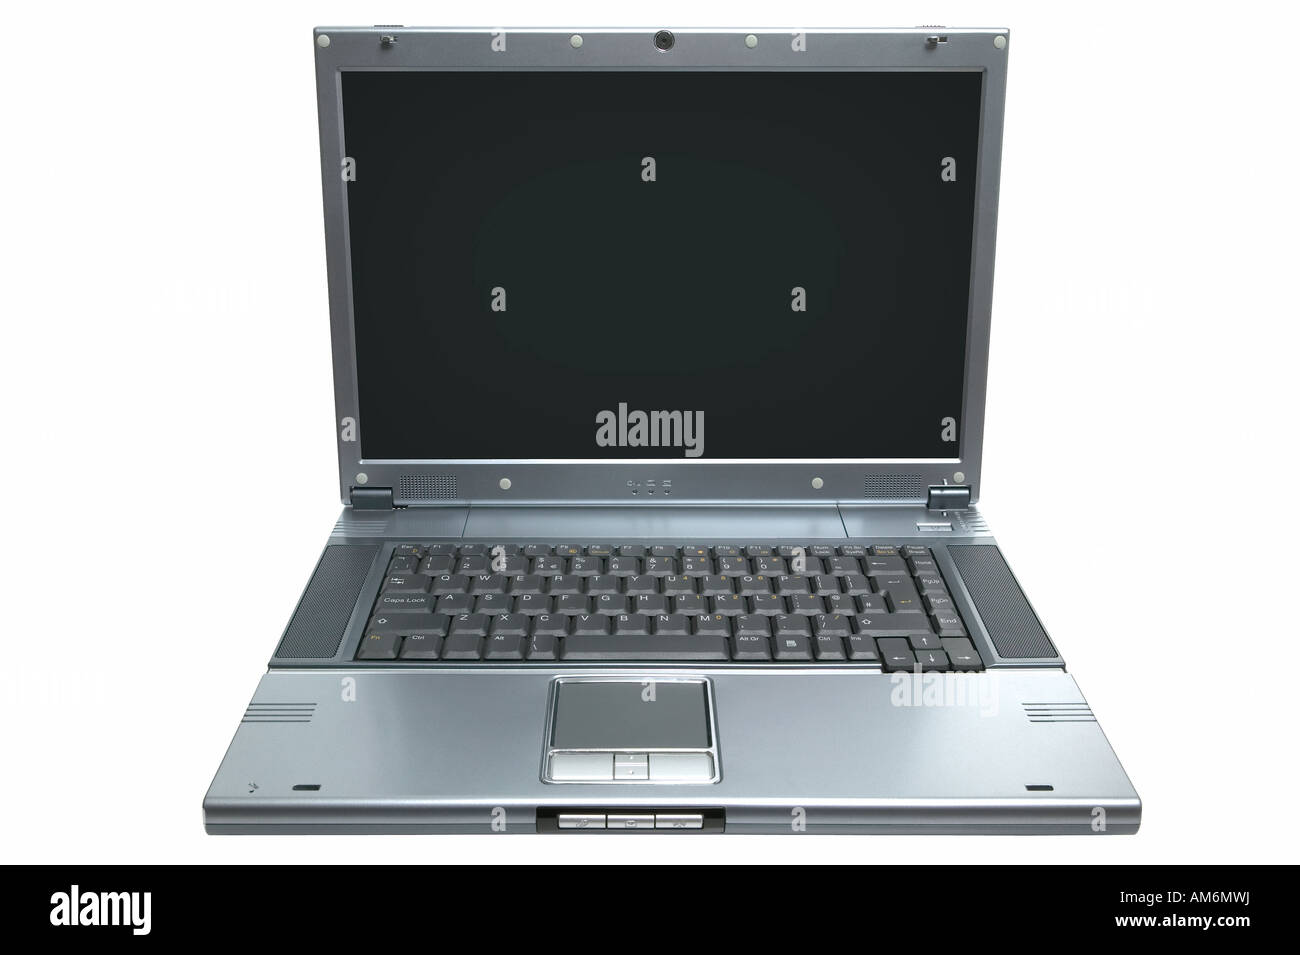 Widescreen Laptop computer isolated on a white background with clipping path for both laptop and screen Stock Photo